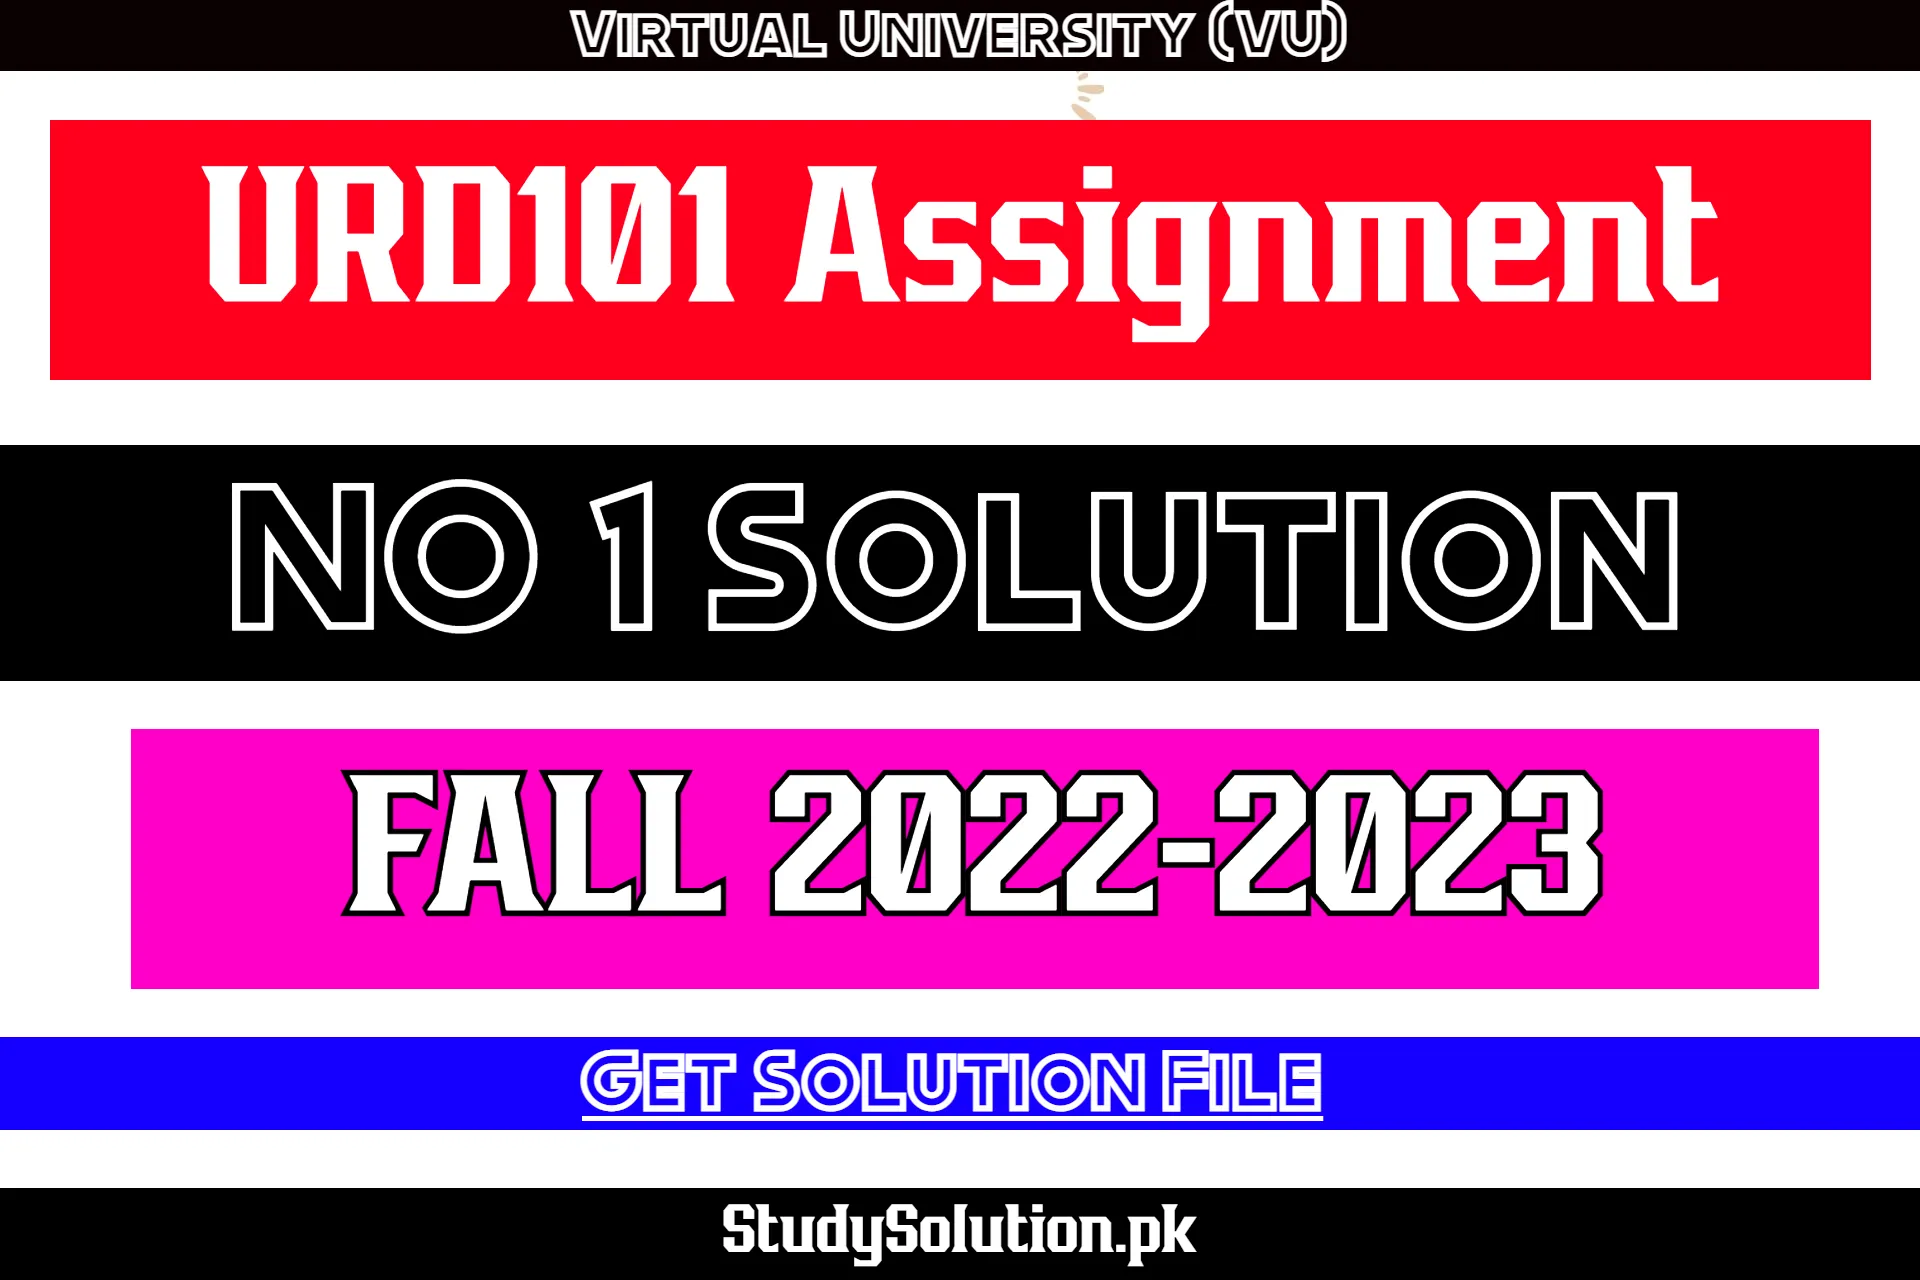 URD101 Assignment No 1 Solution Fall 2022